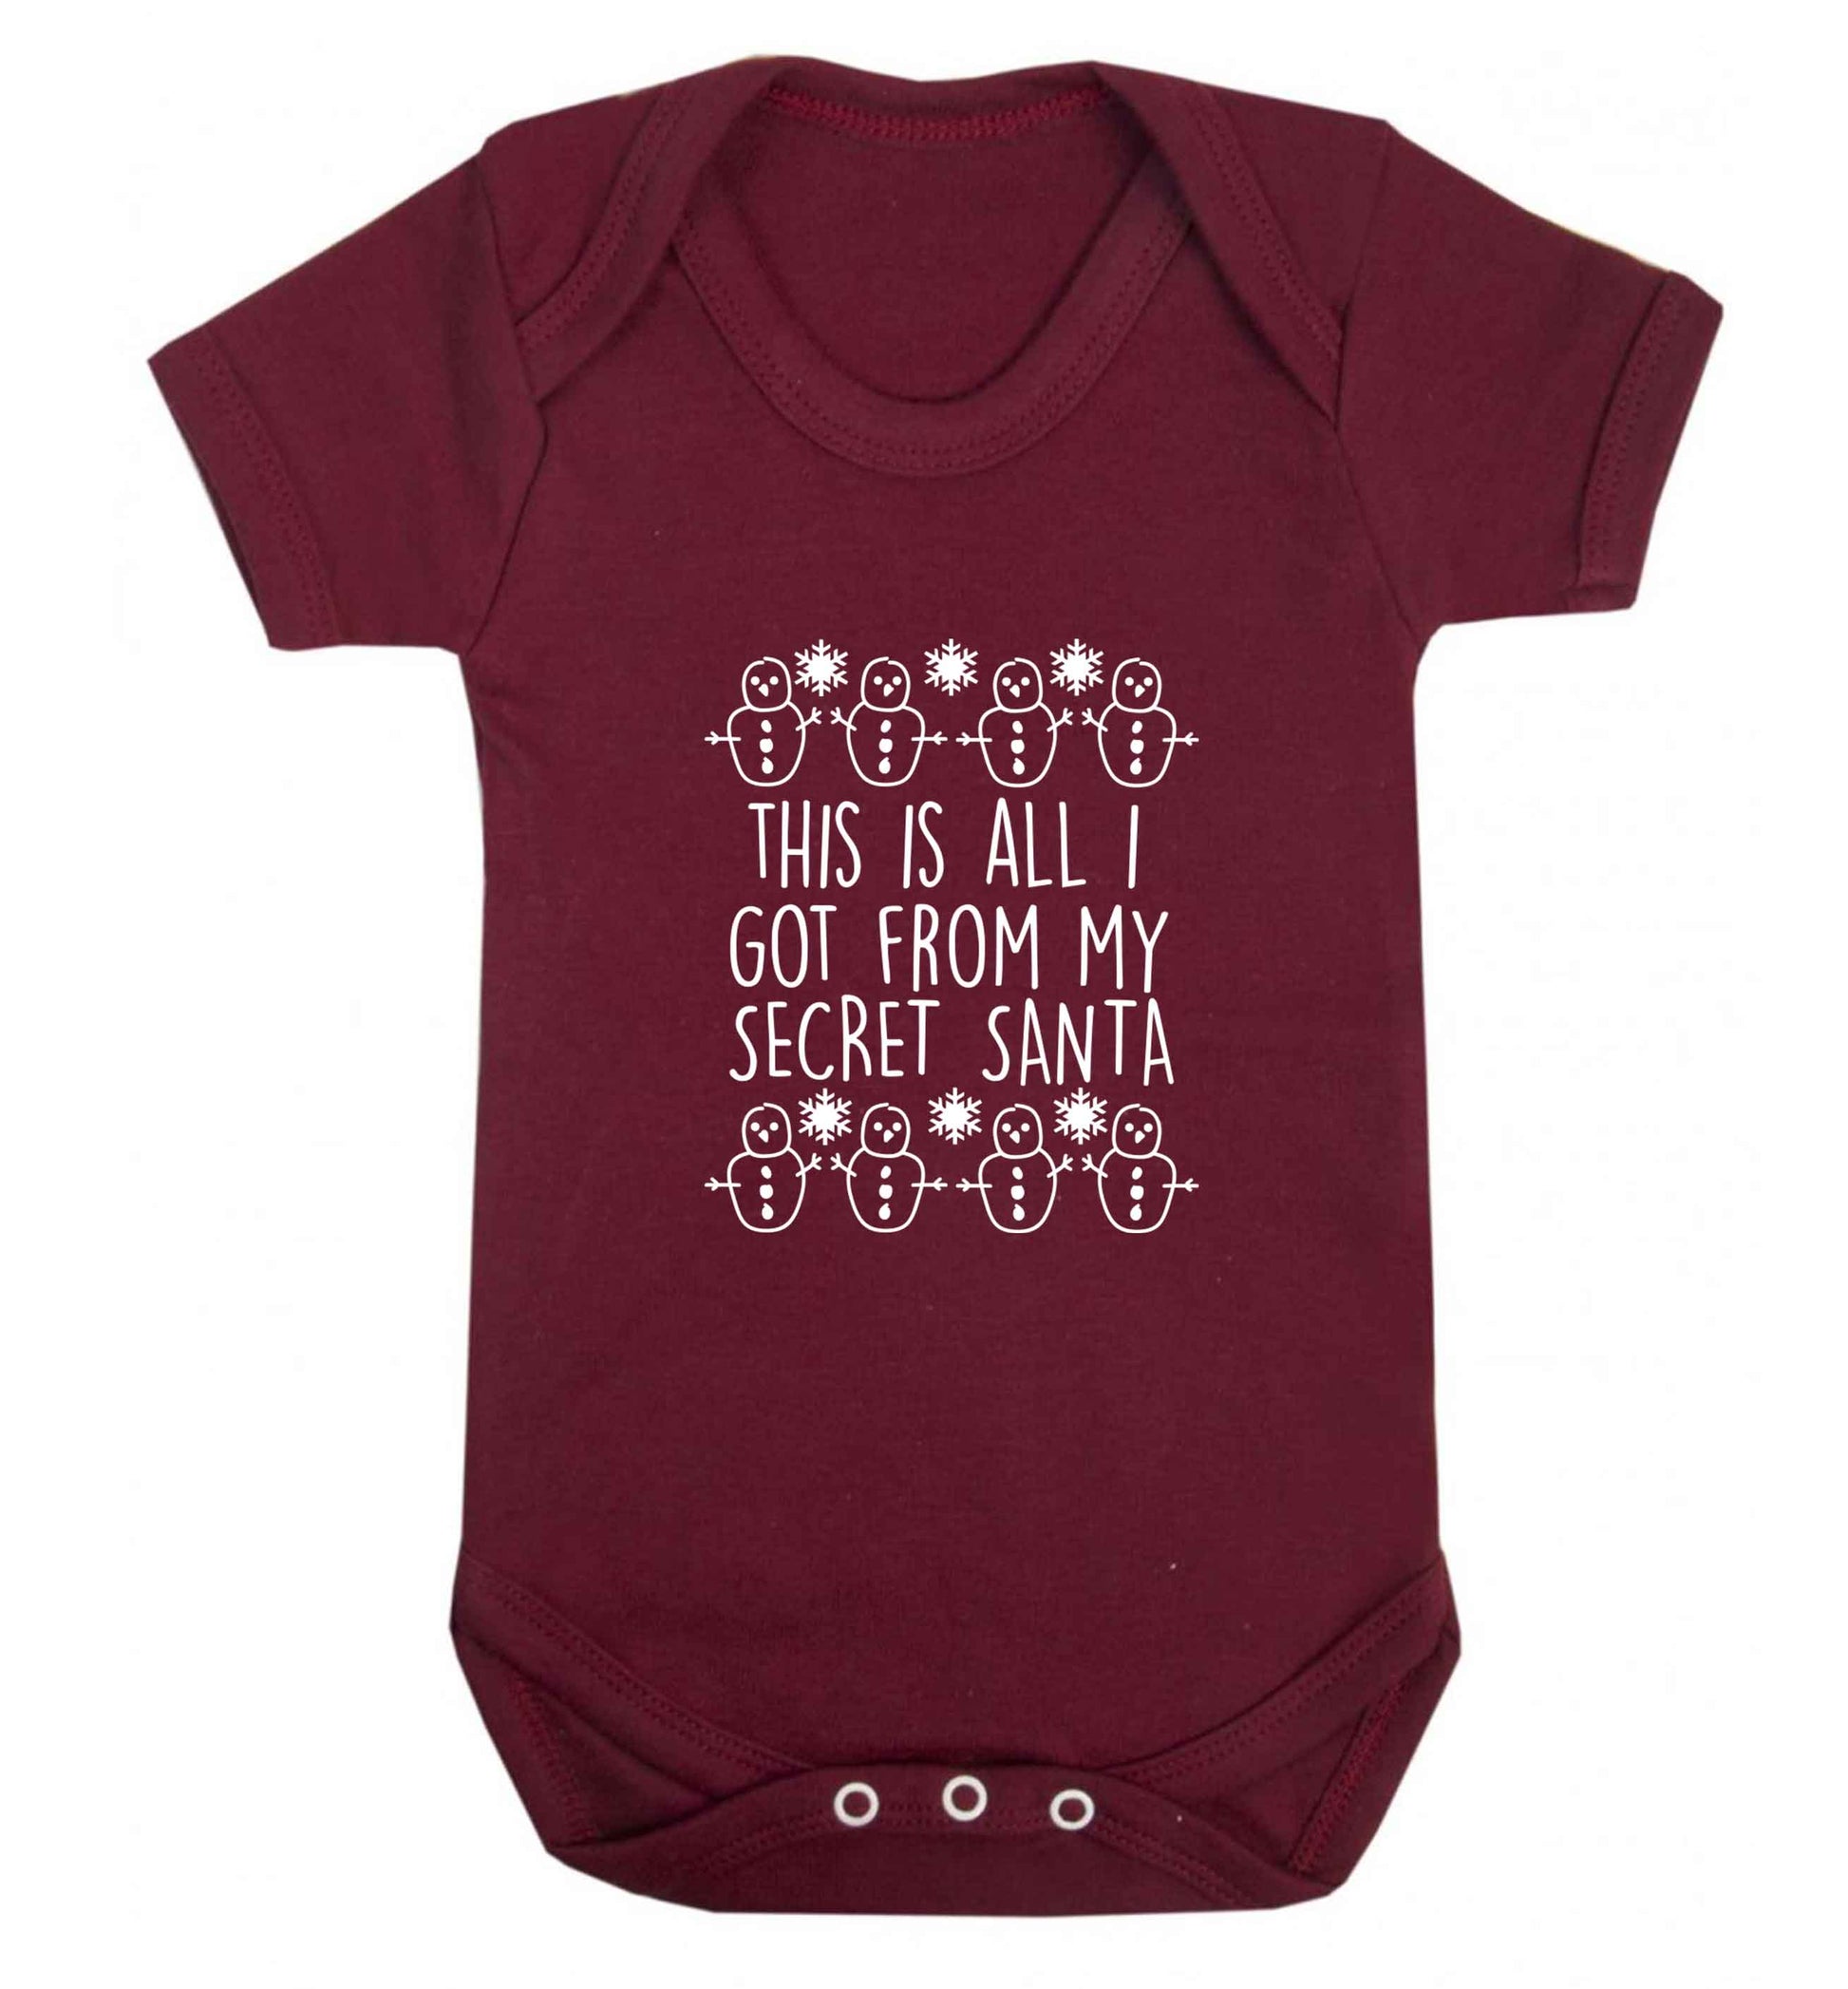 This is all I got from my secret Santa baby vest maroon 18-24 months